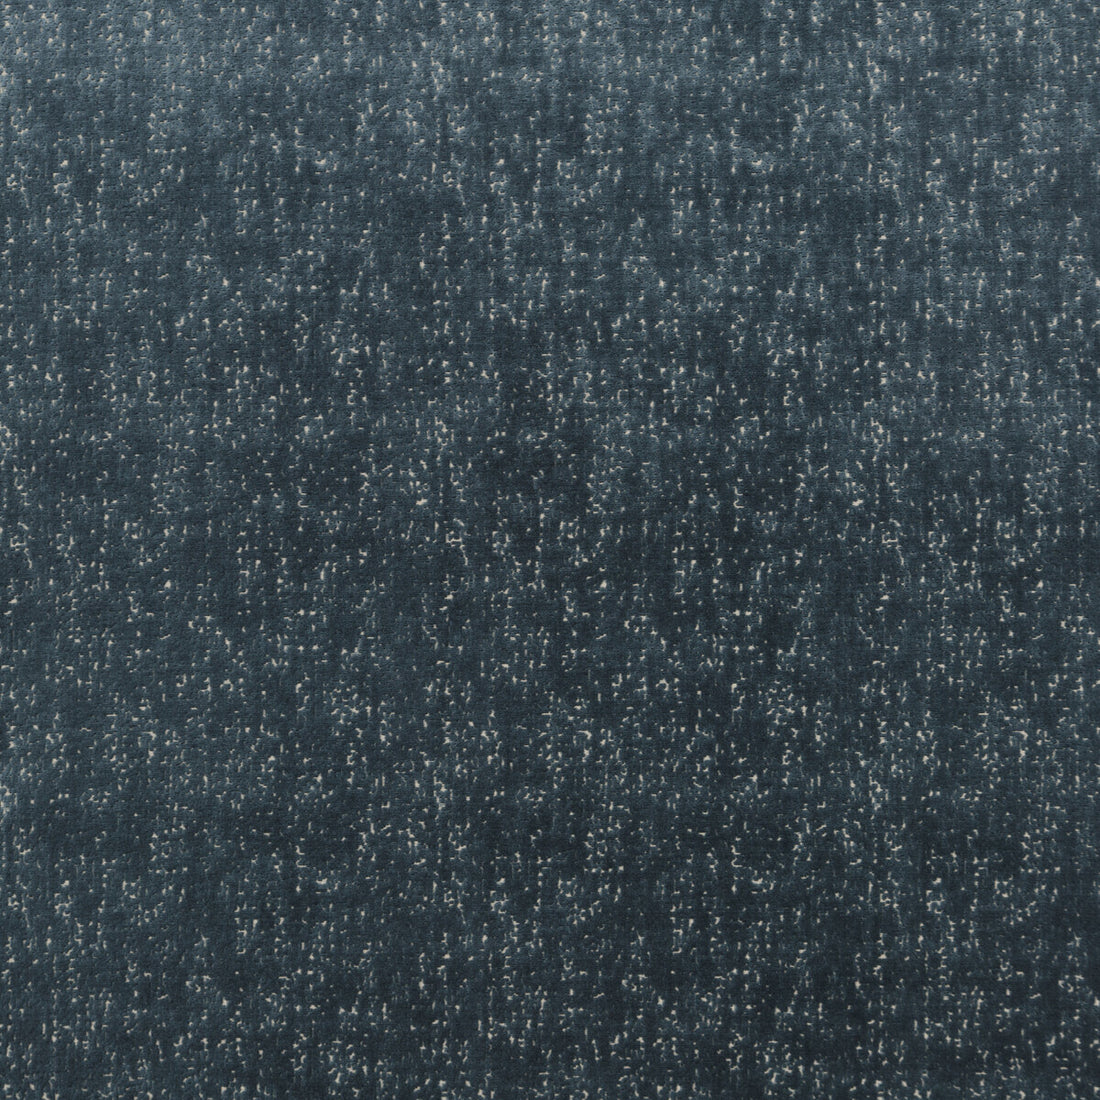 Tango Texture fabric in teal color - pattern PF50422.615.0 - by Baker Lifestyle in the Carnival collection